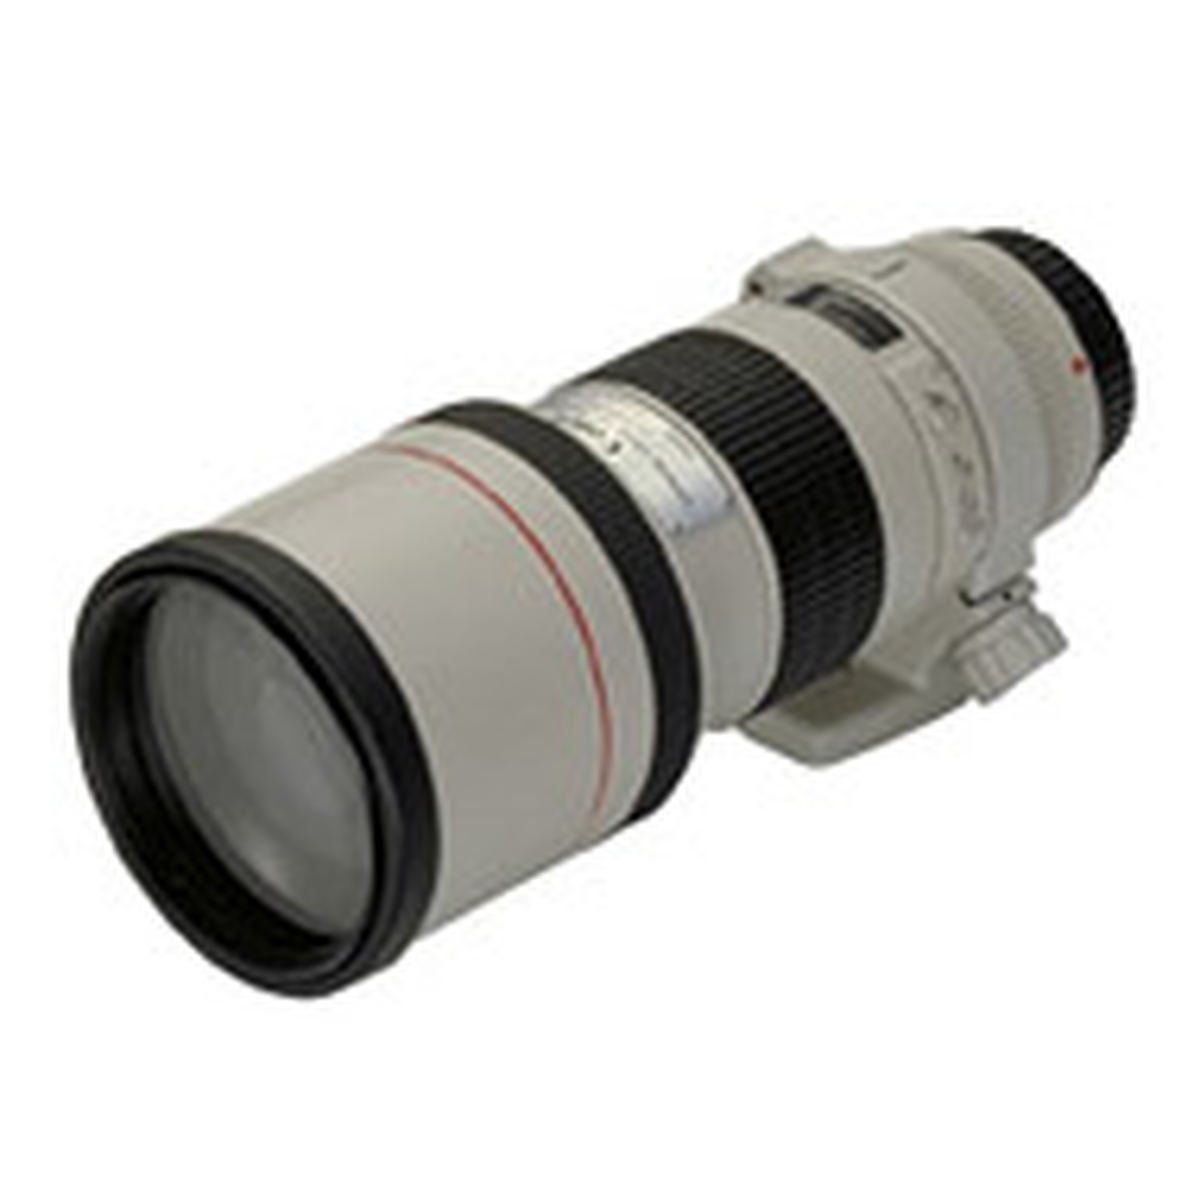 Canon EF 300mm f/4 USM L : Specifications and Opinions | JuzaPhoto